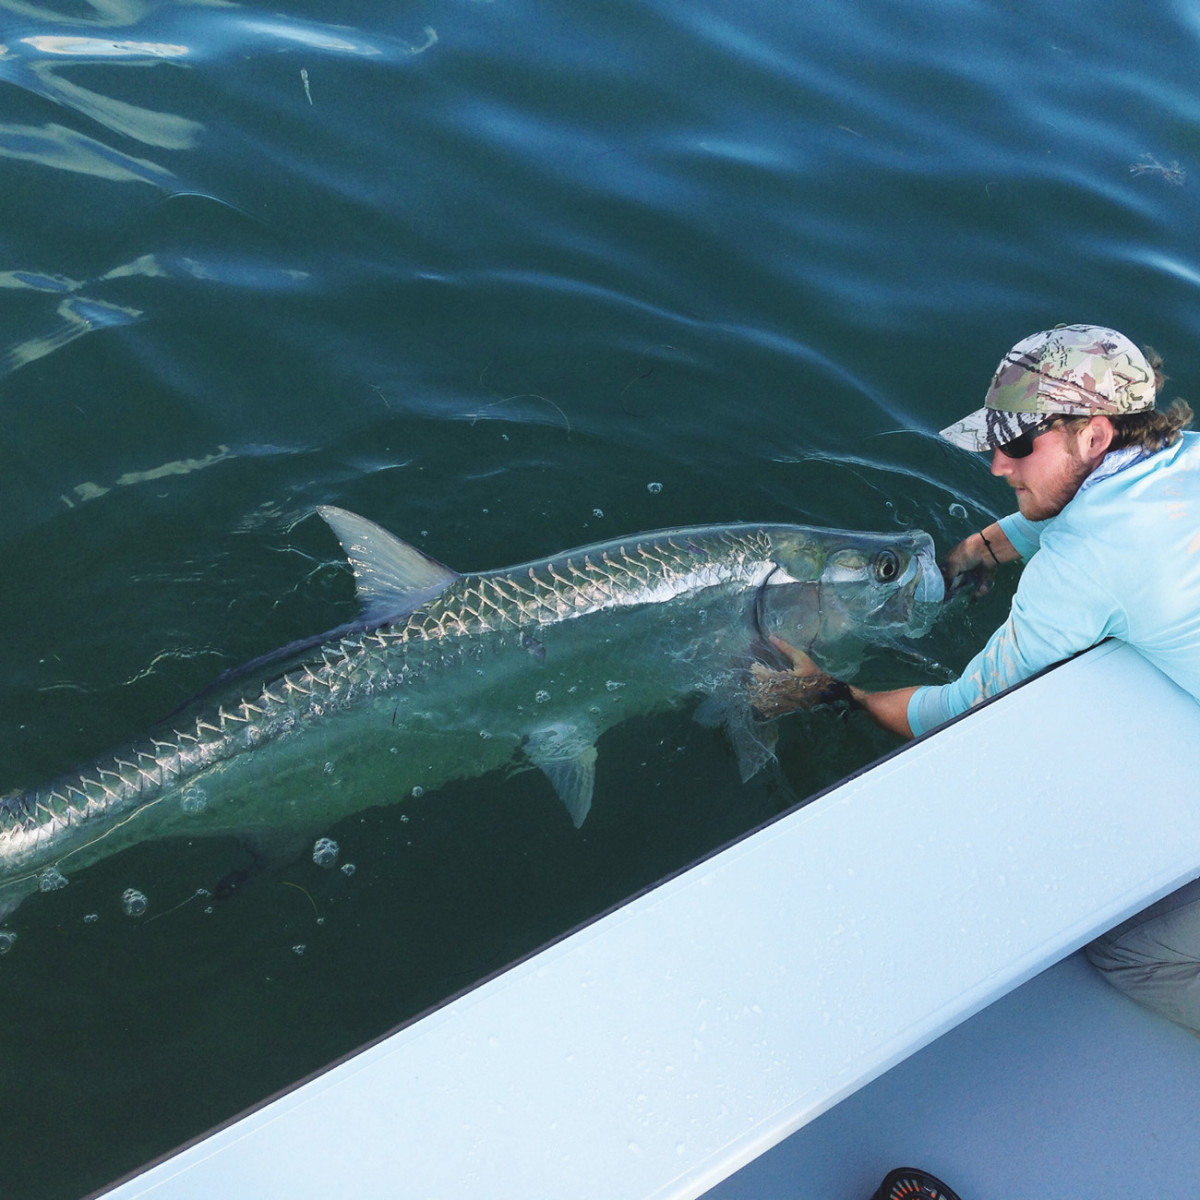 Andy Mill went from chasing gold to chasing solver ... tarpon that is.